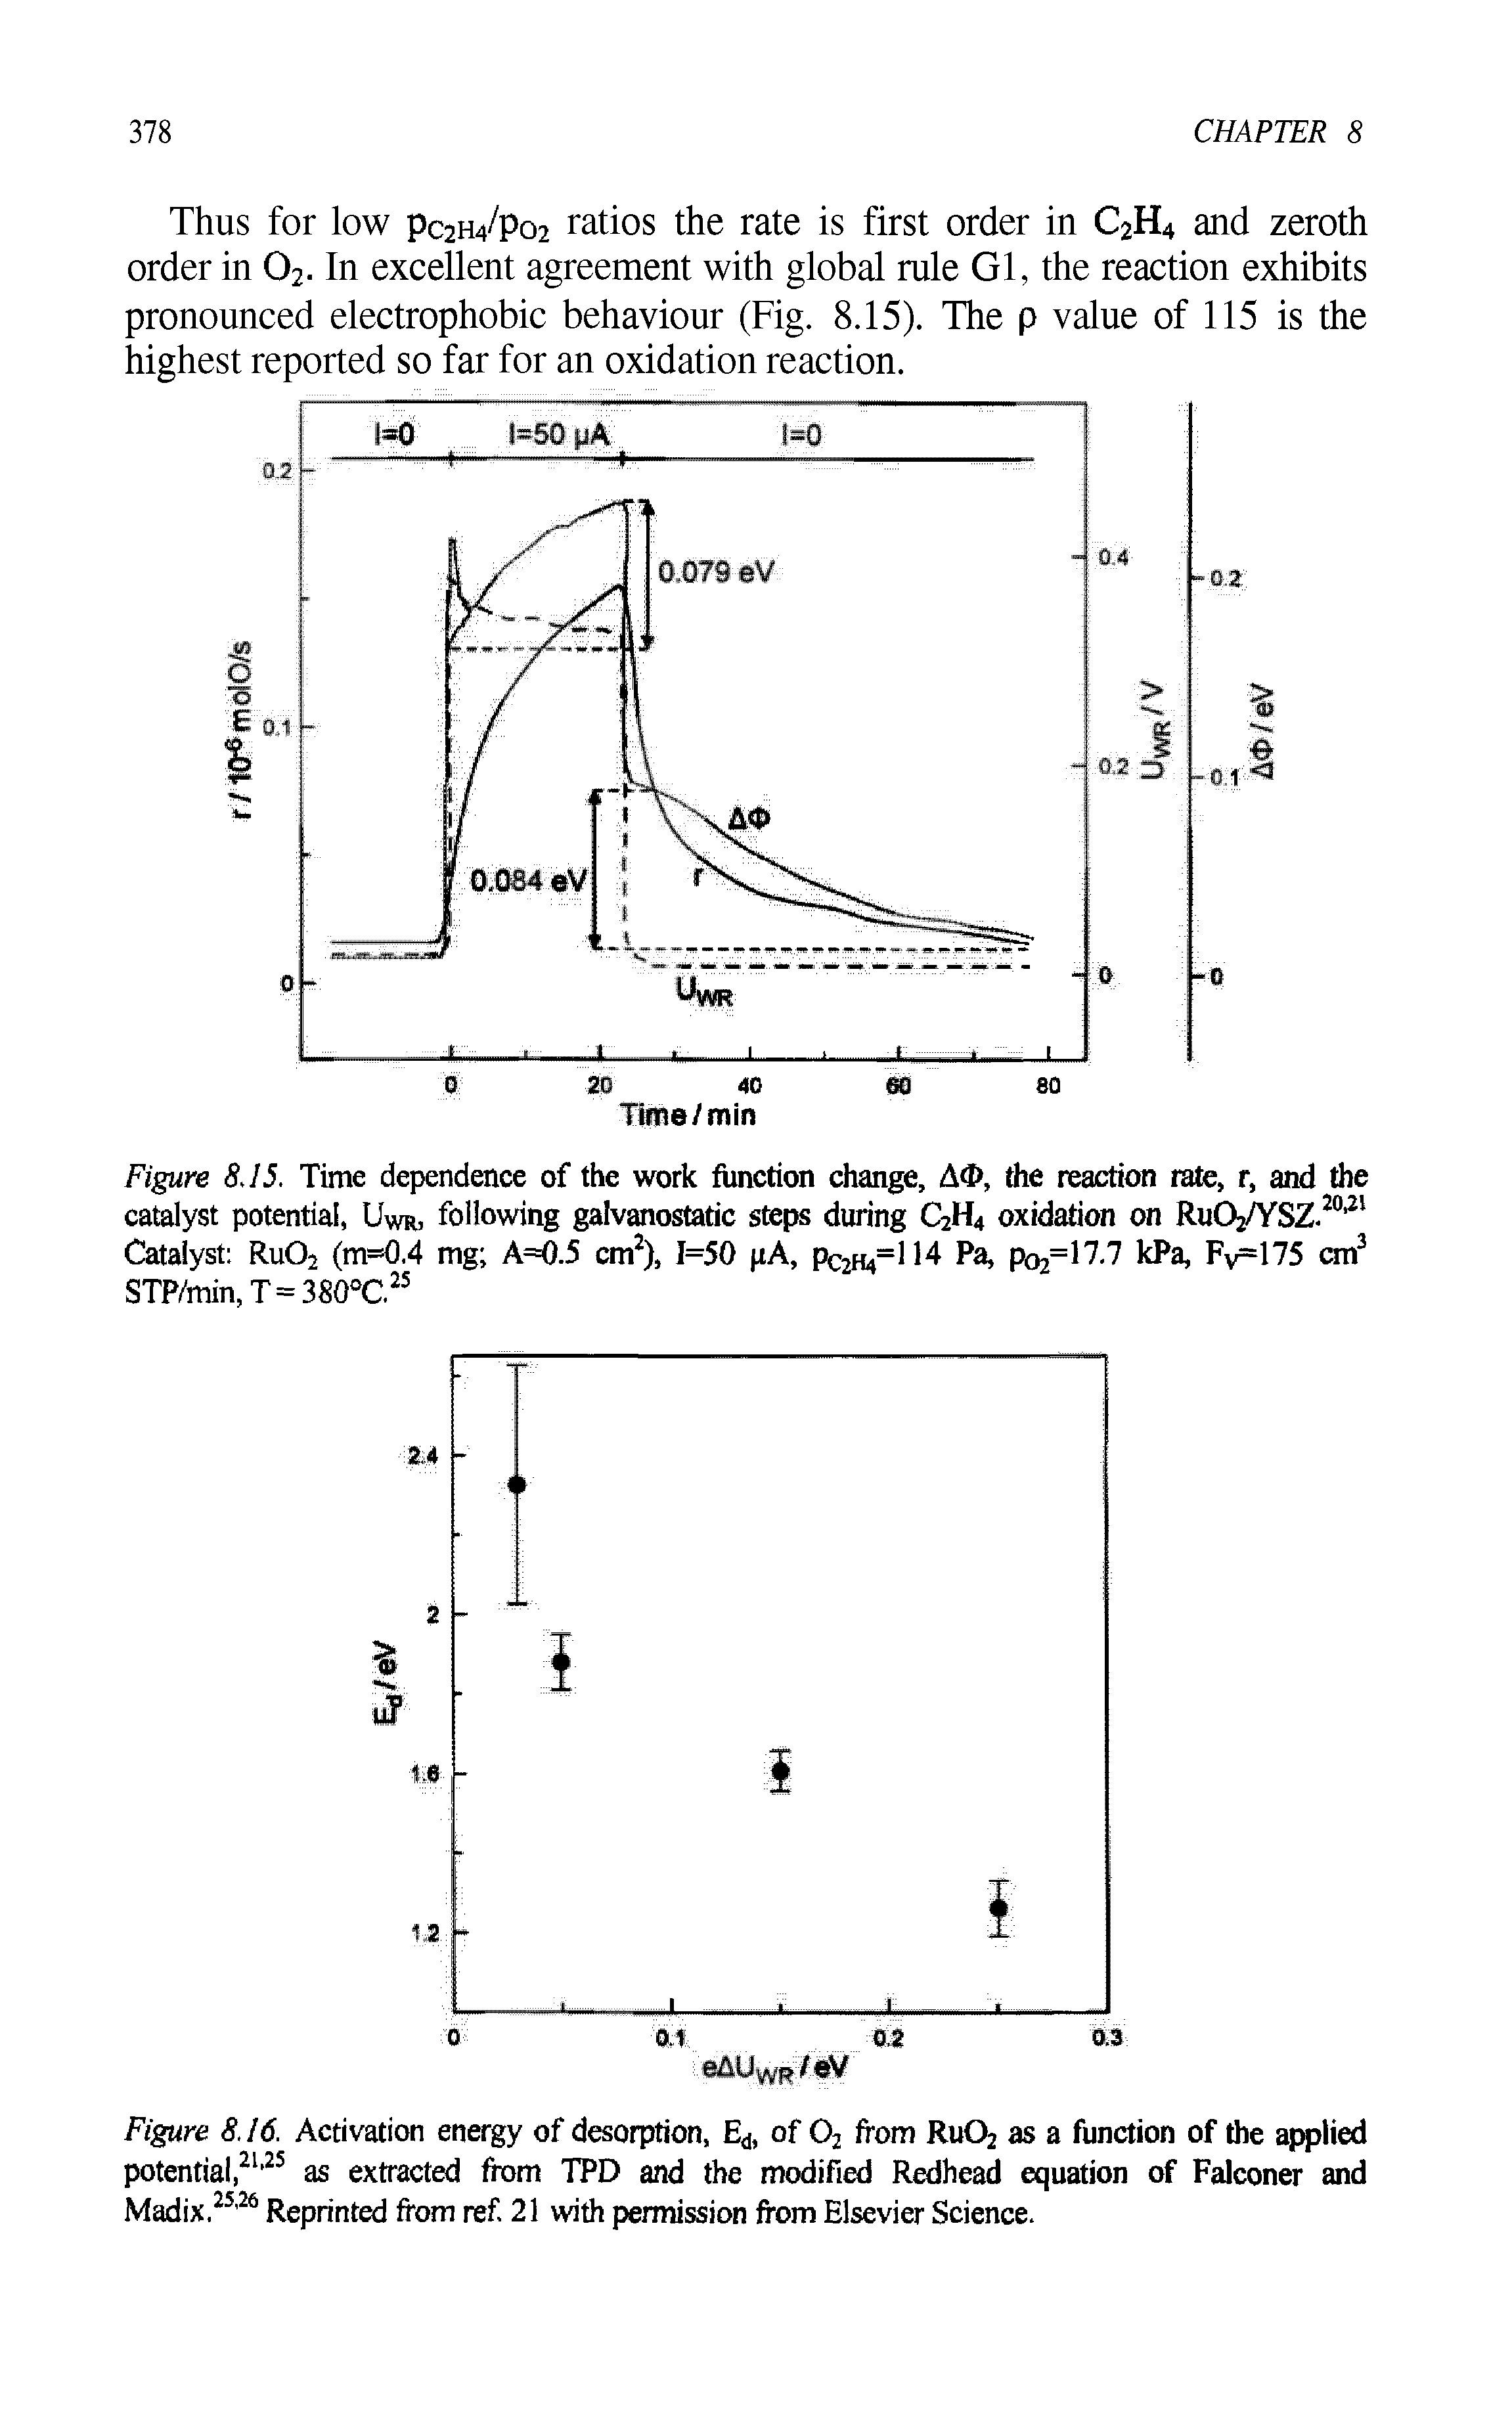 Figure 8.15. Time dependence of the work function change, AO, the reaction rate, r, and the catalyst potential, Uwr, following galvanostatic steps during C2H4 oxidation on RuCVYSZ.20,21 Catalyst Ru02 (m=0.4 mg A=0.5 cm2), 1=50 pA, Pc2H4=1 14 Pa, po2=17.7 kPa, Fy=175 cm3 STP/min, T = 380°C.25...